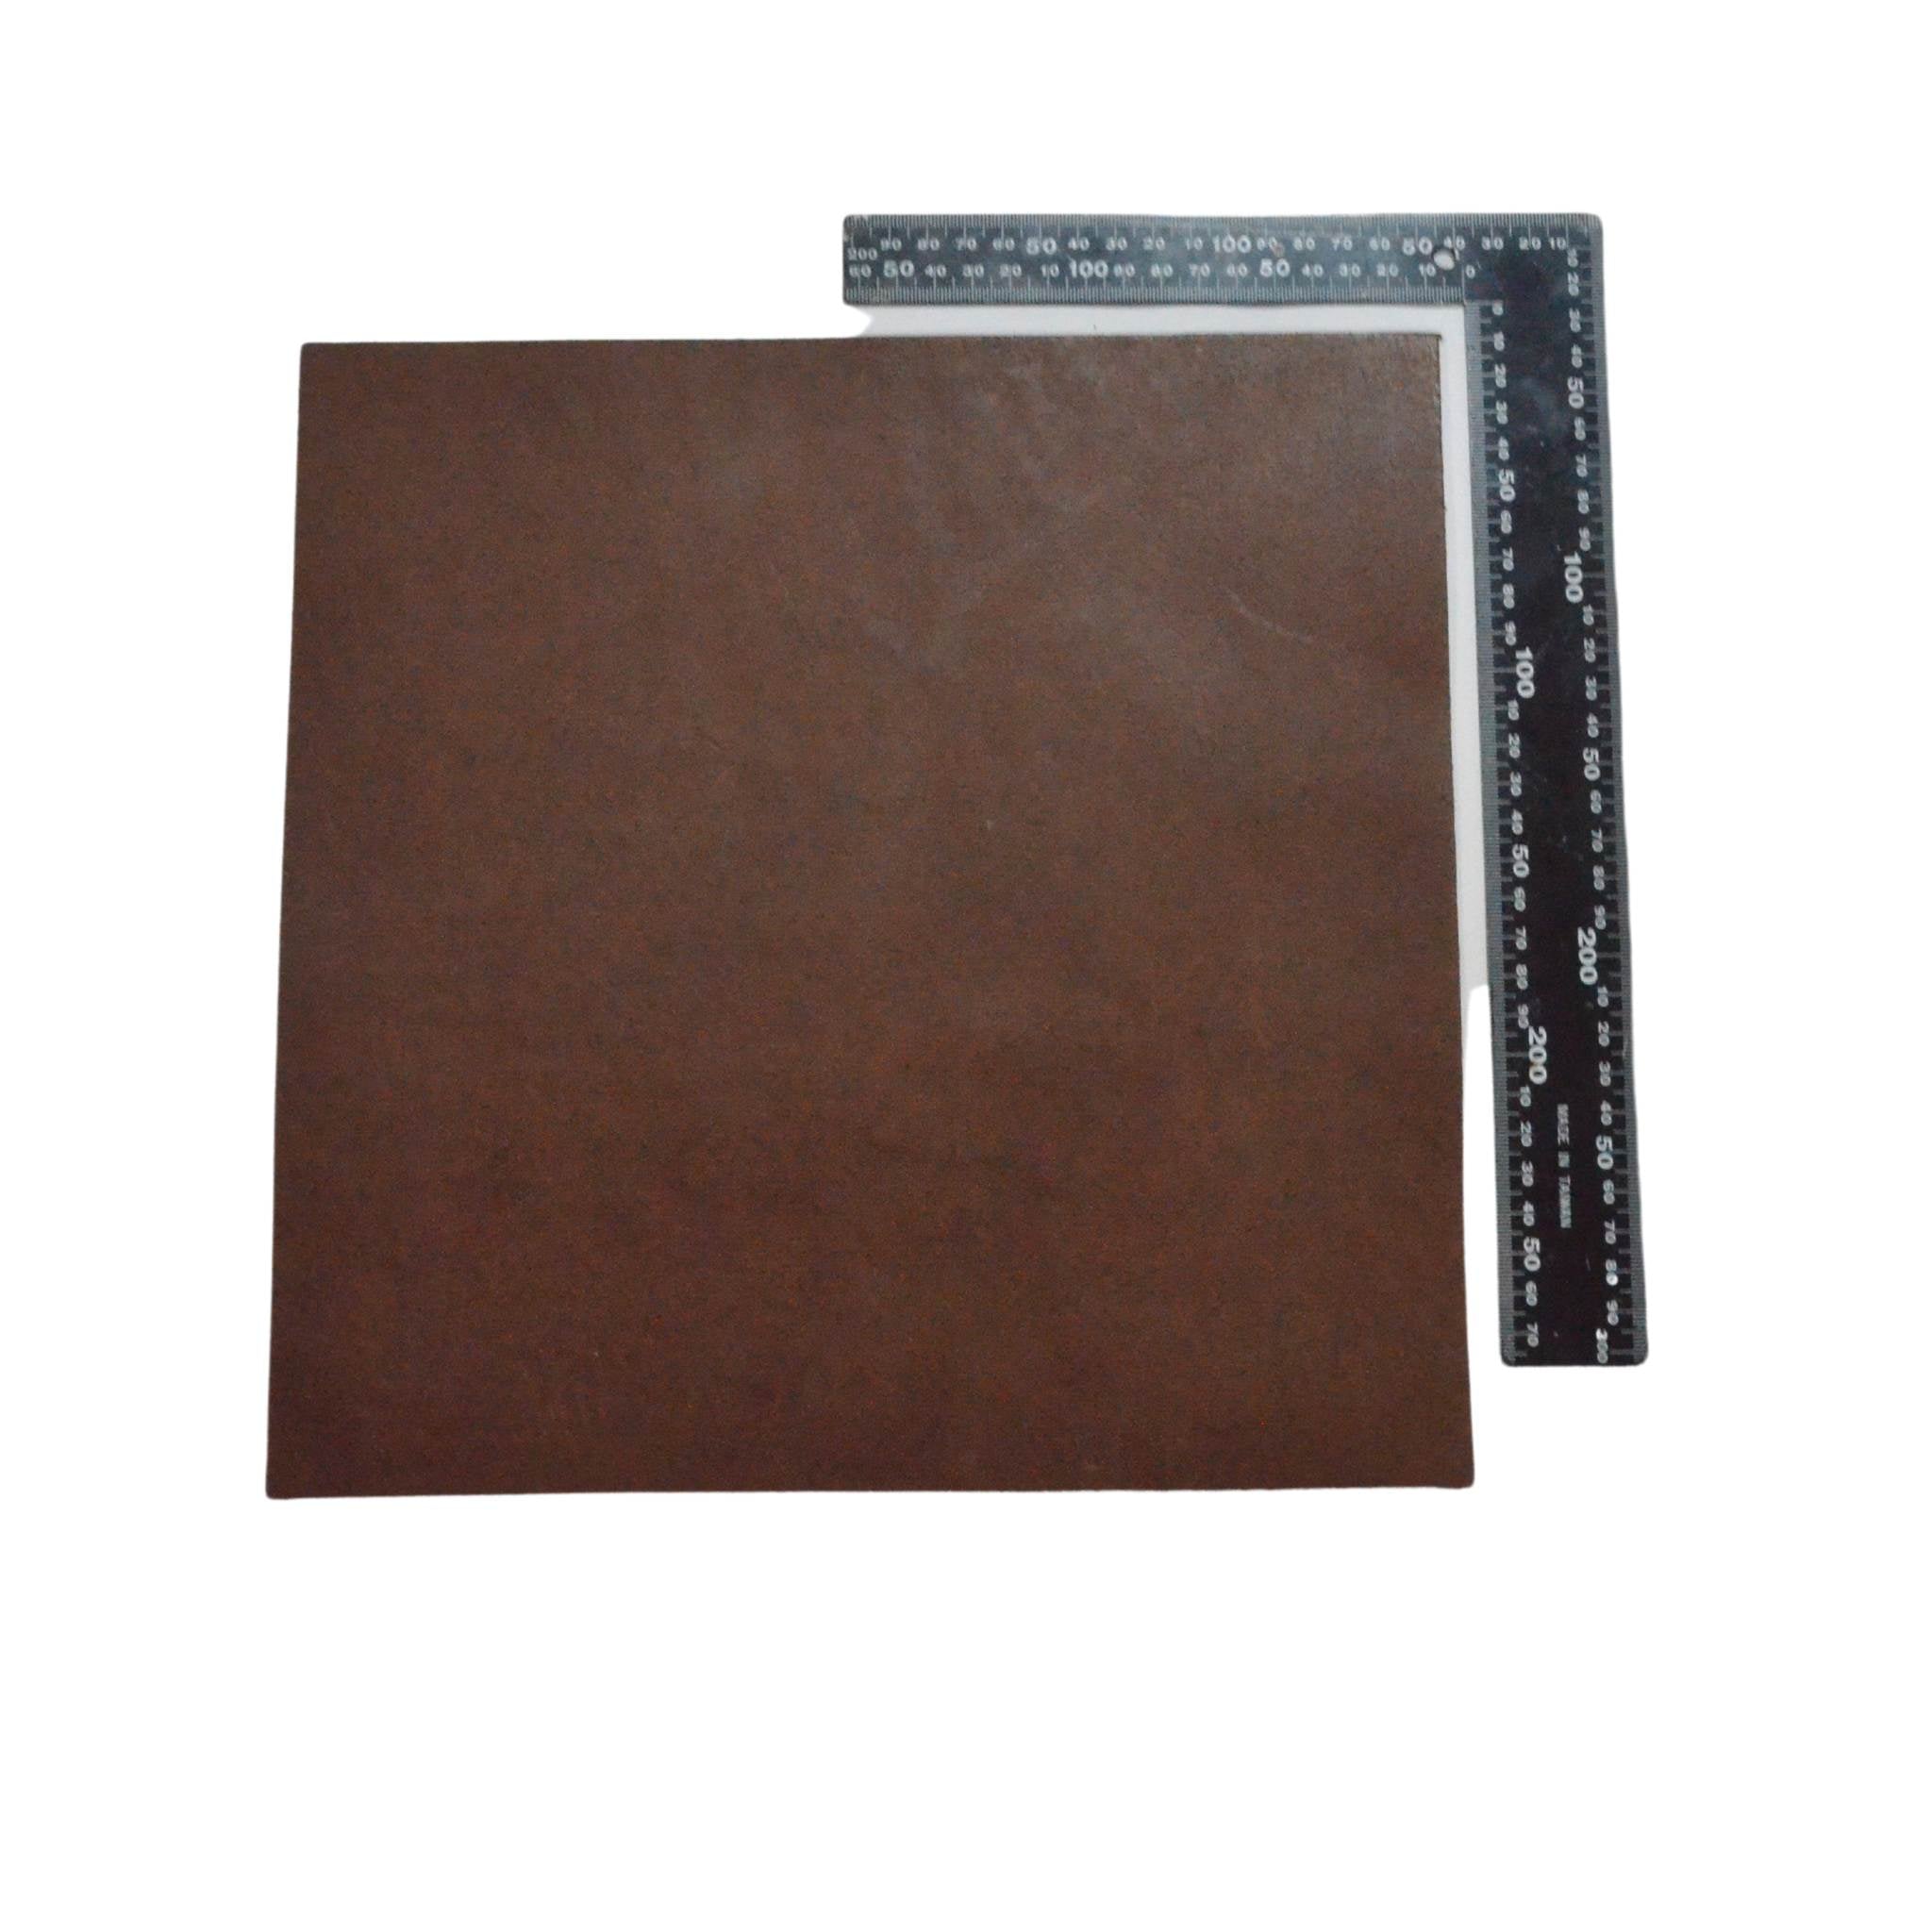 Dyed brown vegetable tanned kangaroo leather ideal for falconry, wallet making and more